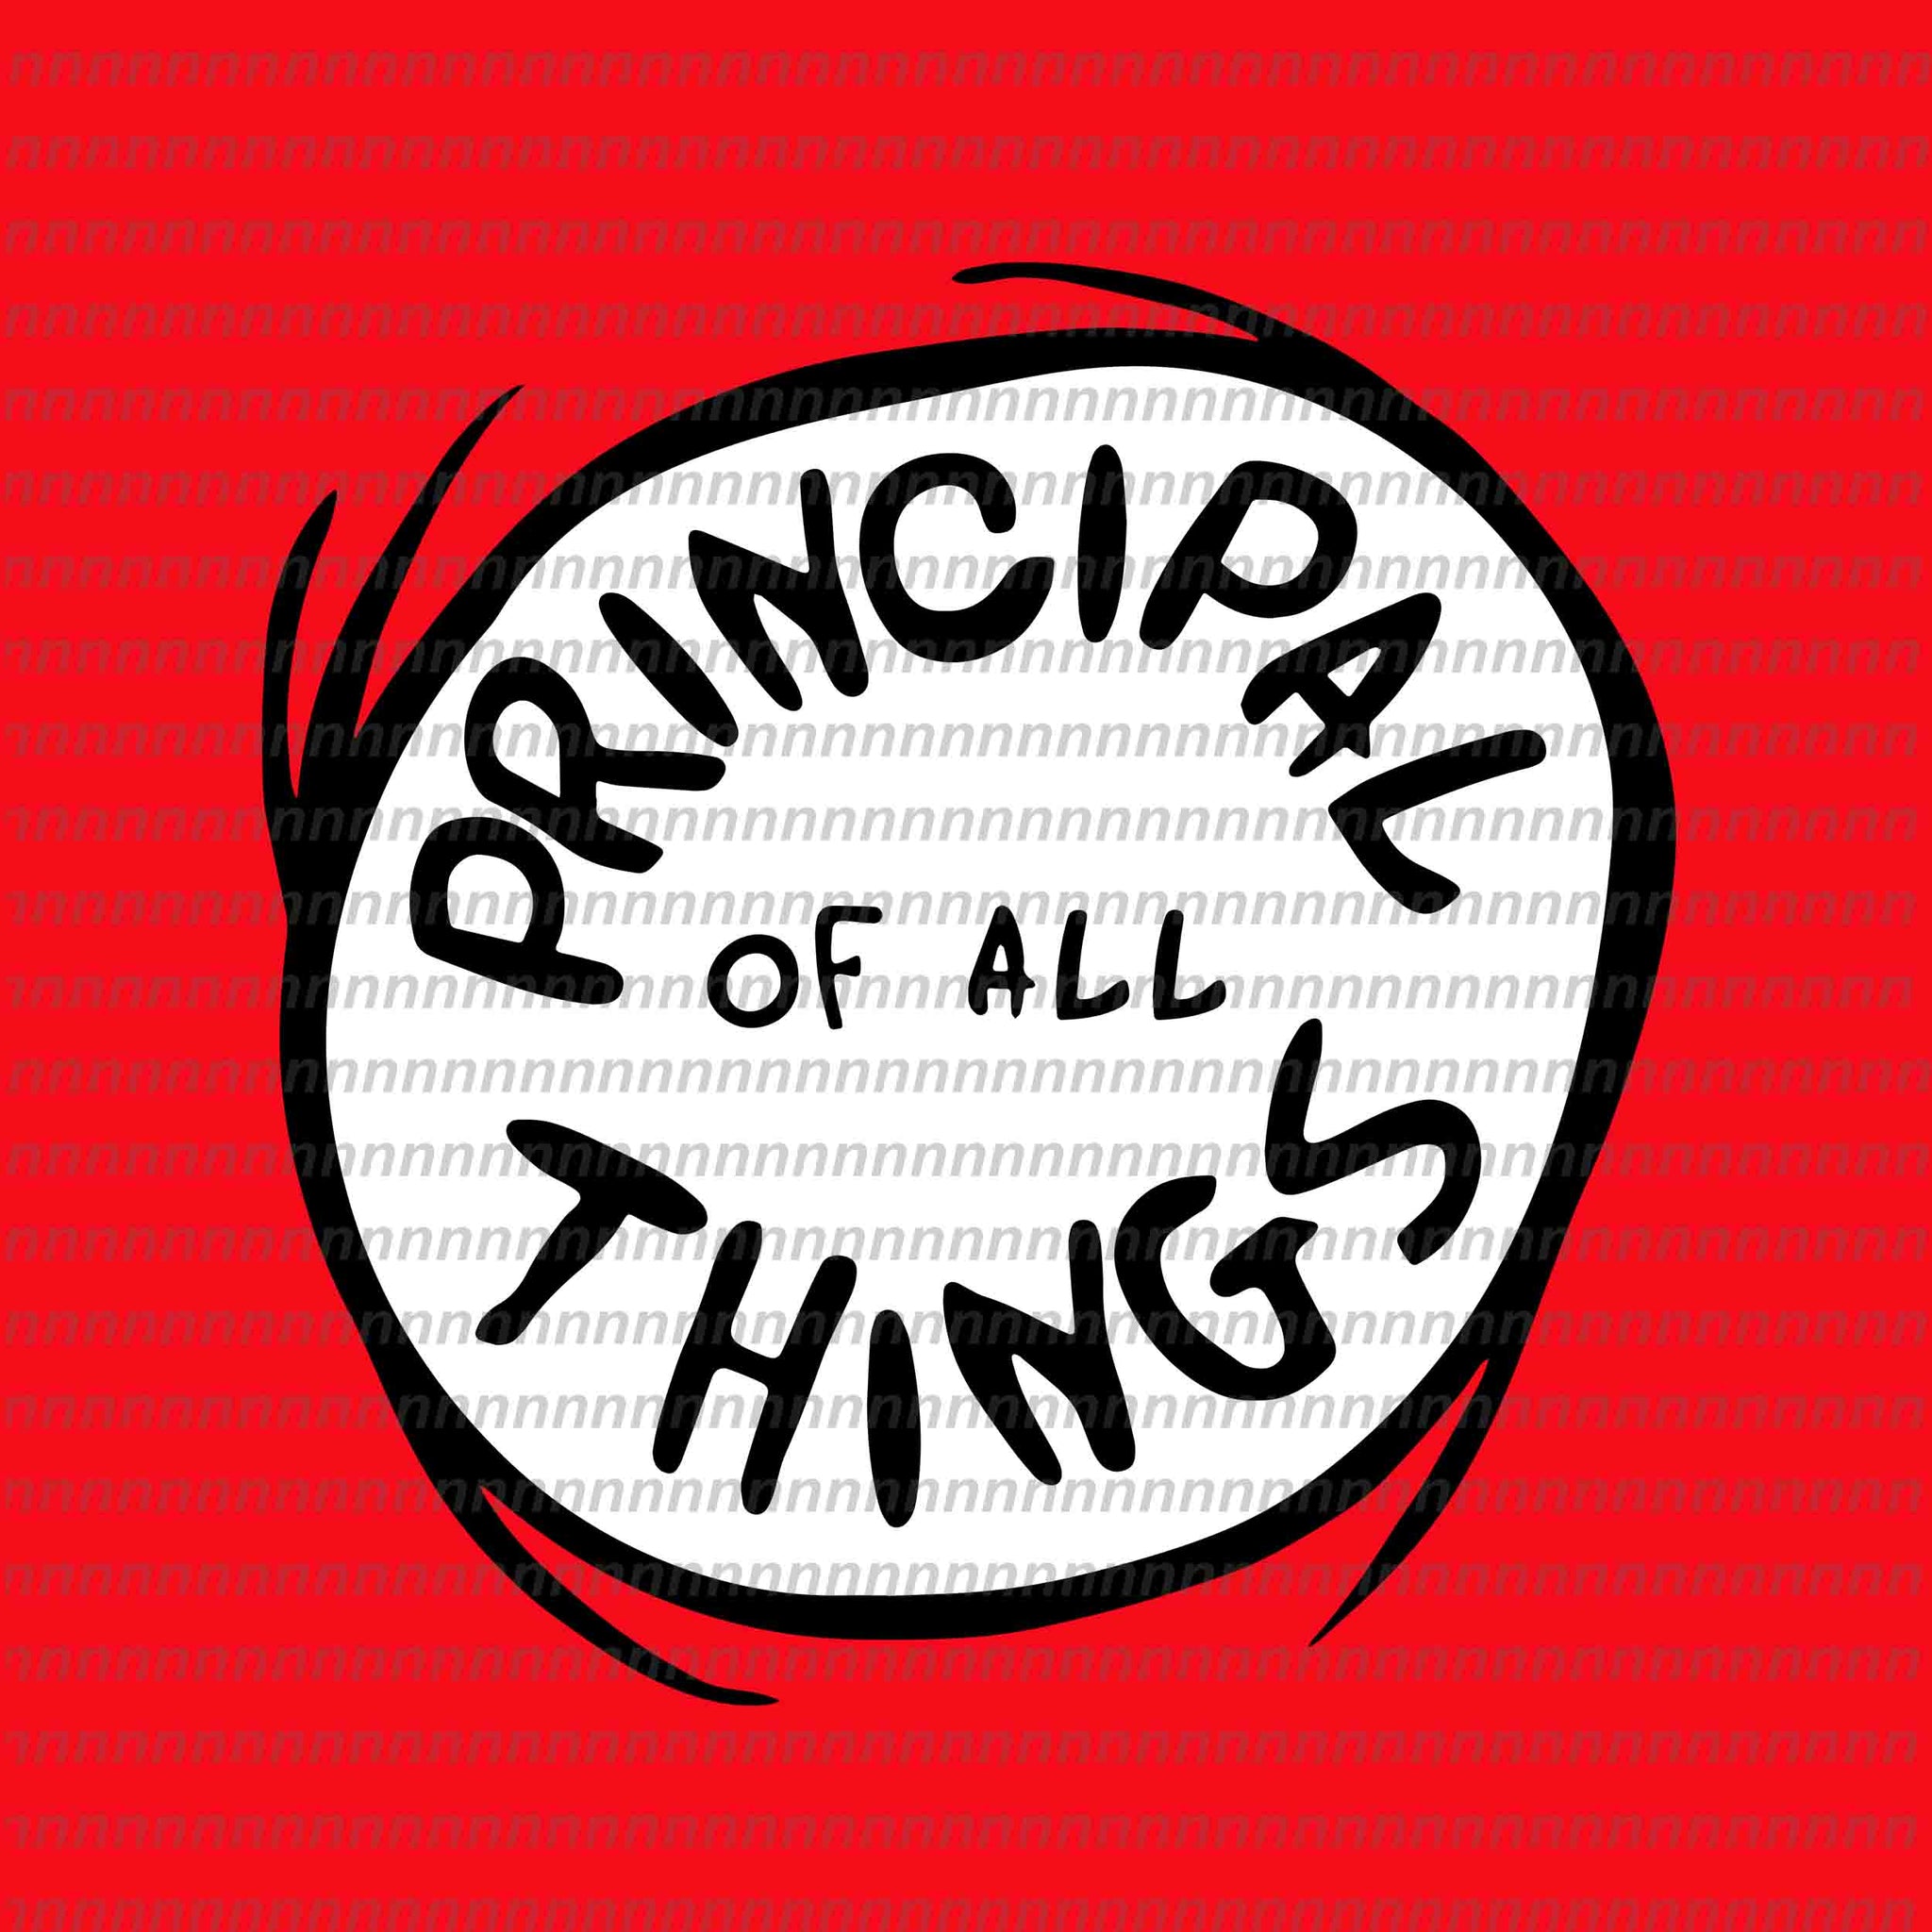 Principal of all things svg, dr seuss svg,dr seuss vector, dr seuss quote, dr seuss design, Cat in the hat svg, thing 1 thing 2 thing 3, svg, png, dxf, eps file